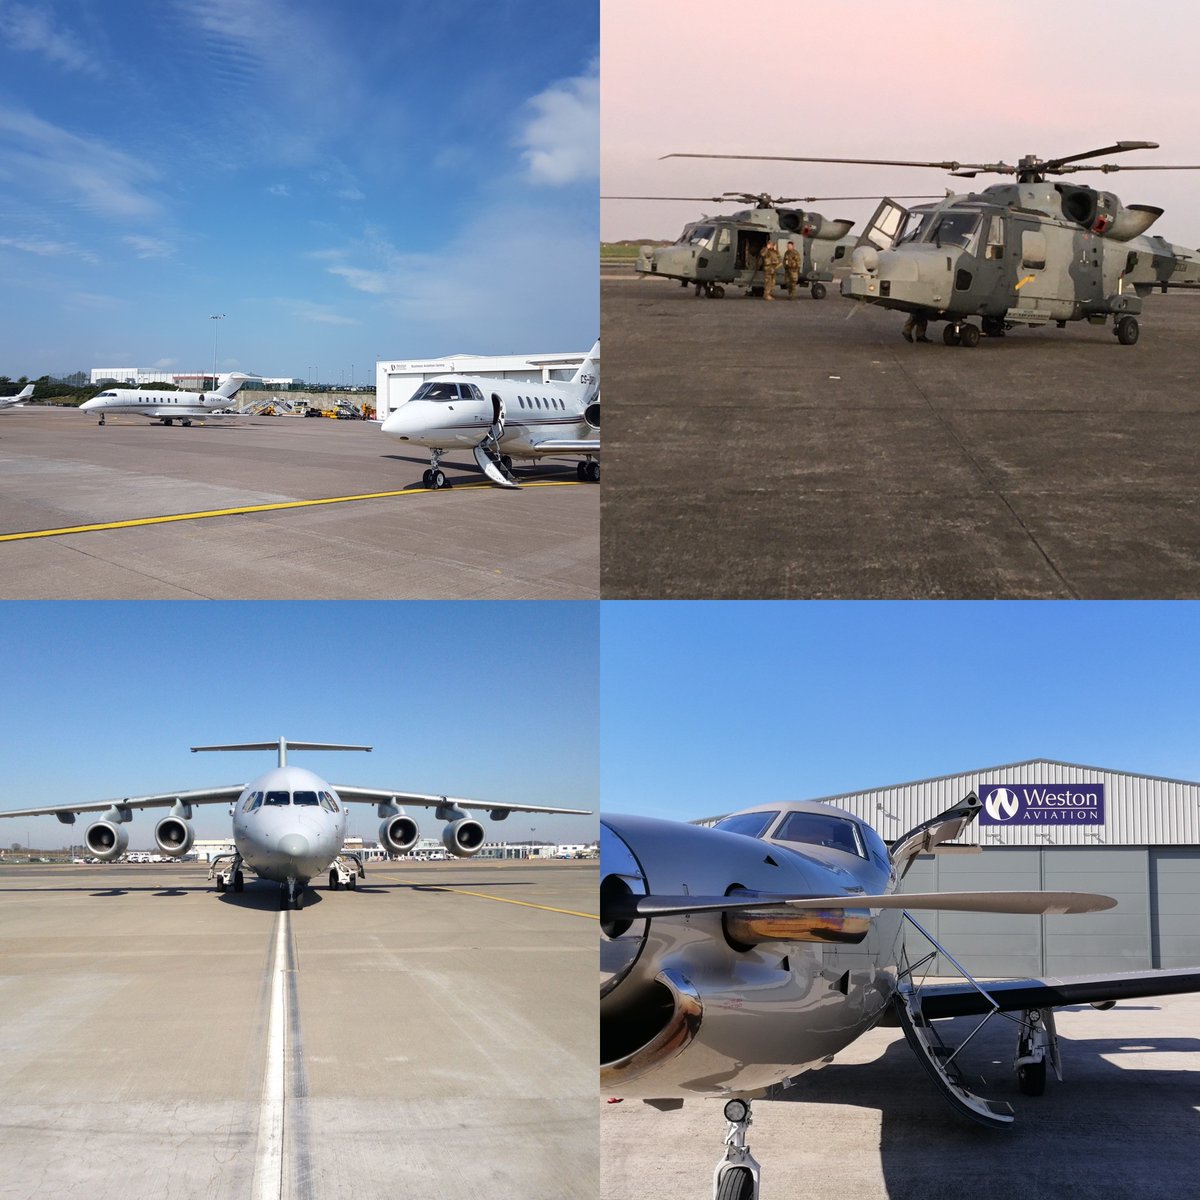 With blue skies prevailing, our FBOs are fully open to assist @GlosAirport @manairport @CorkAirport @Humberside @Newquay_Airport #TeamWeston is ready & waiting. #westonaviation #aviation #military #helicopter #avgeek #vip #fbo #handling #linetraining #fuelstop #avgeek #raf